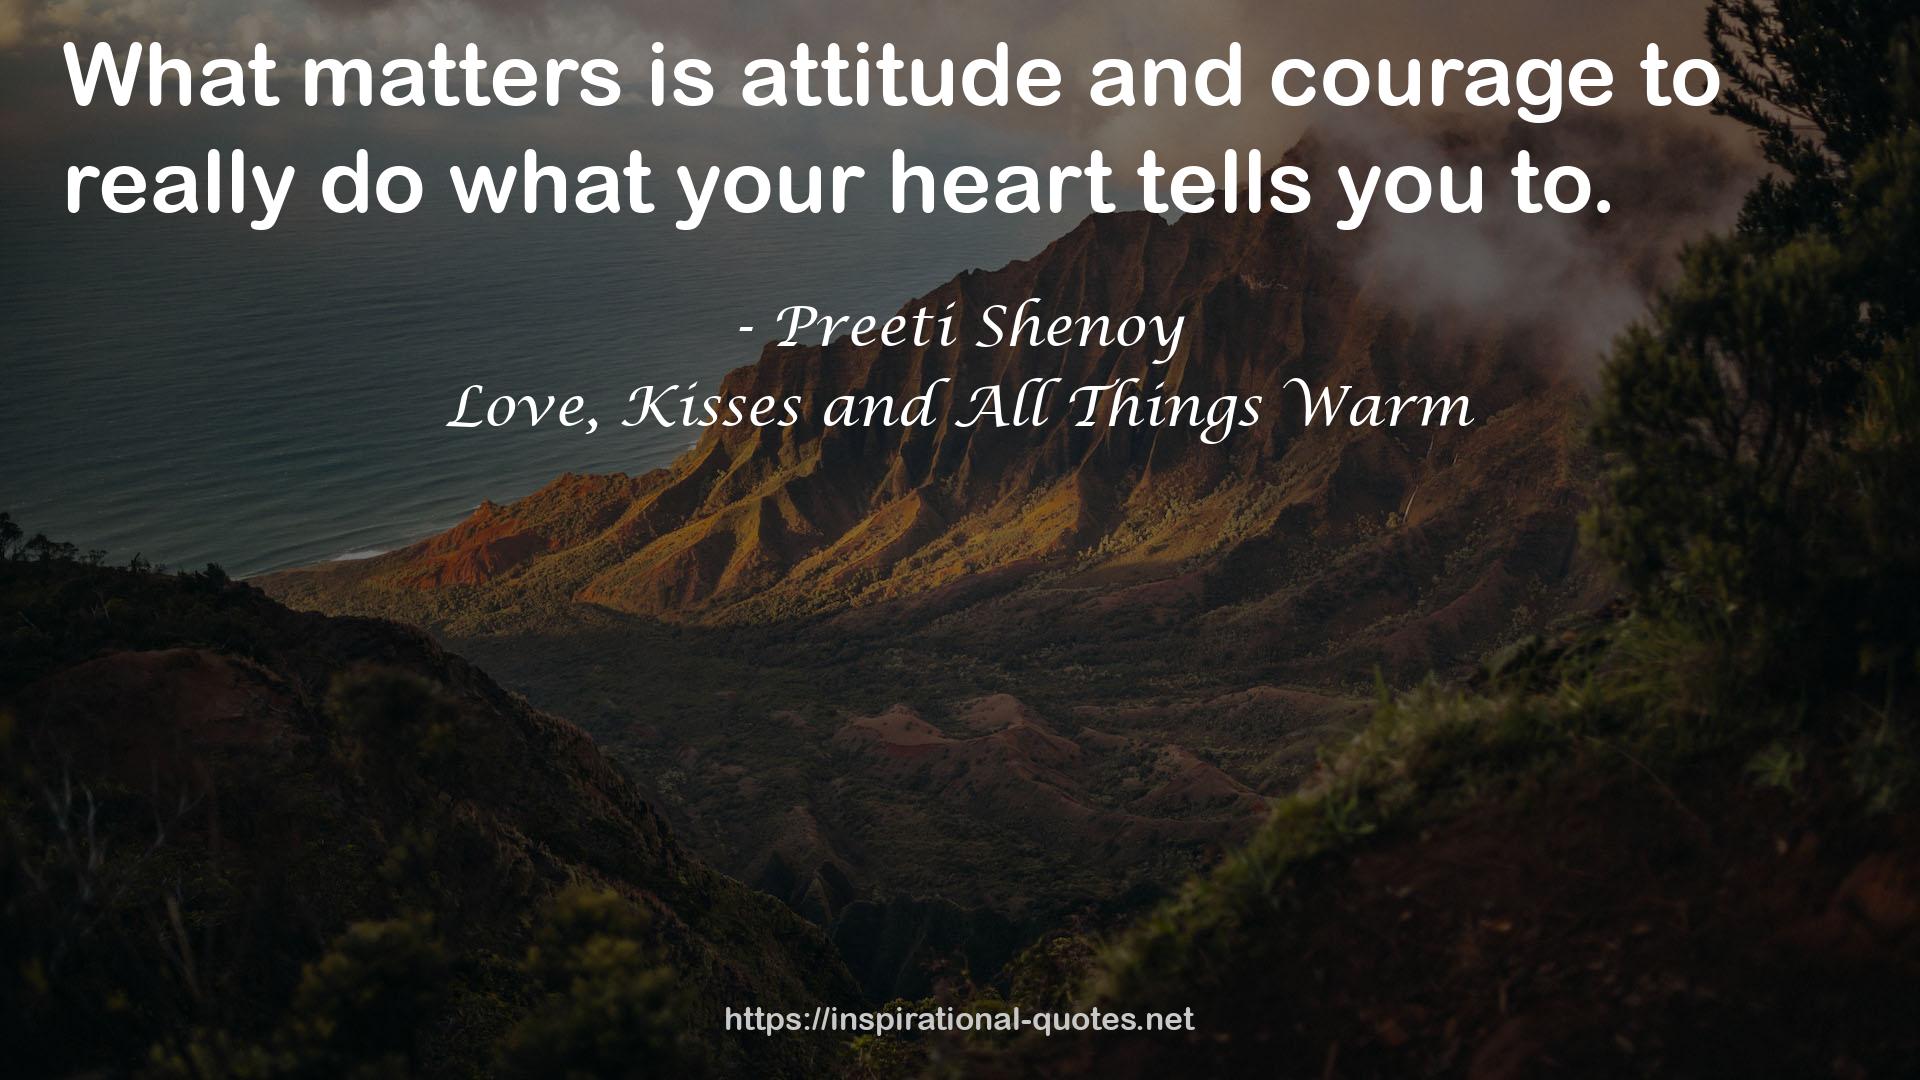 Love, Kisses and All Things Warm QUOTES